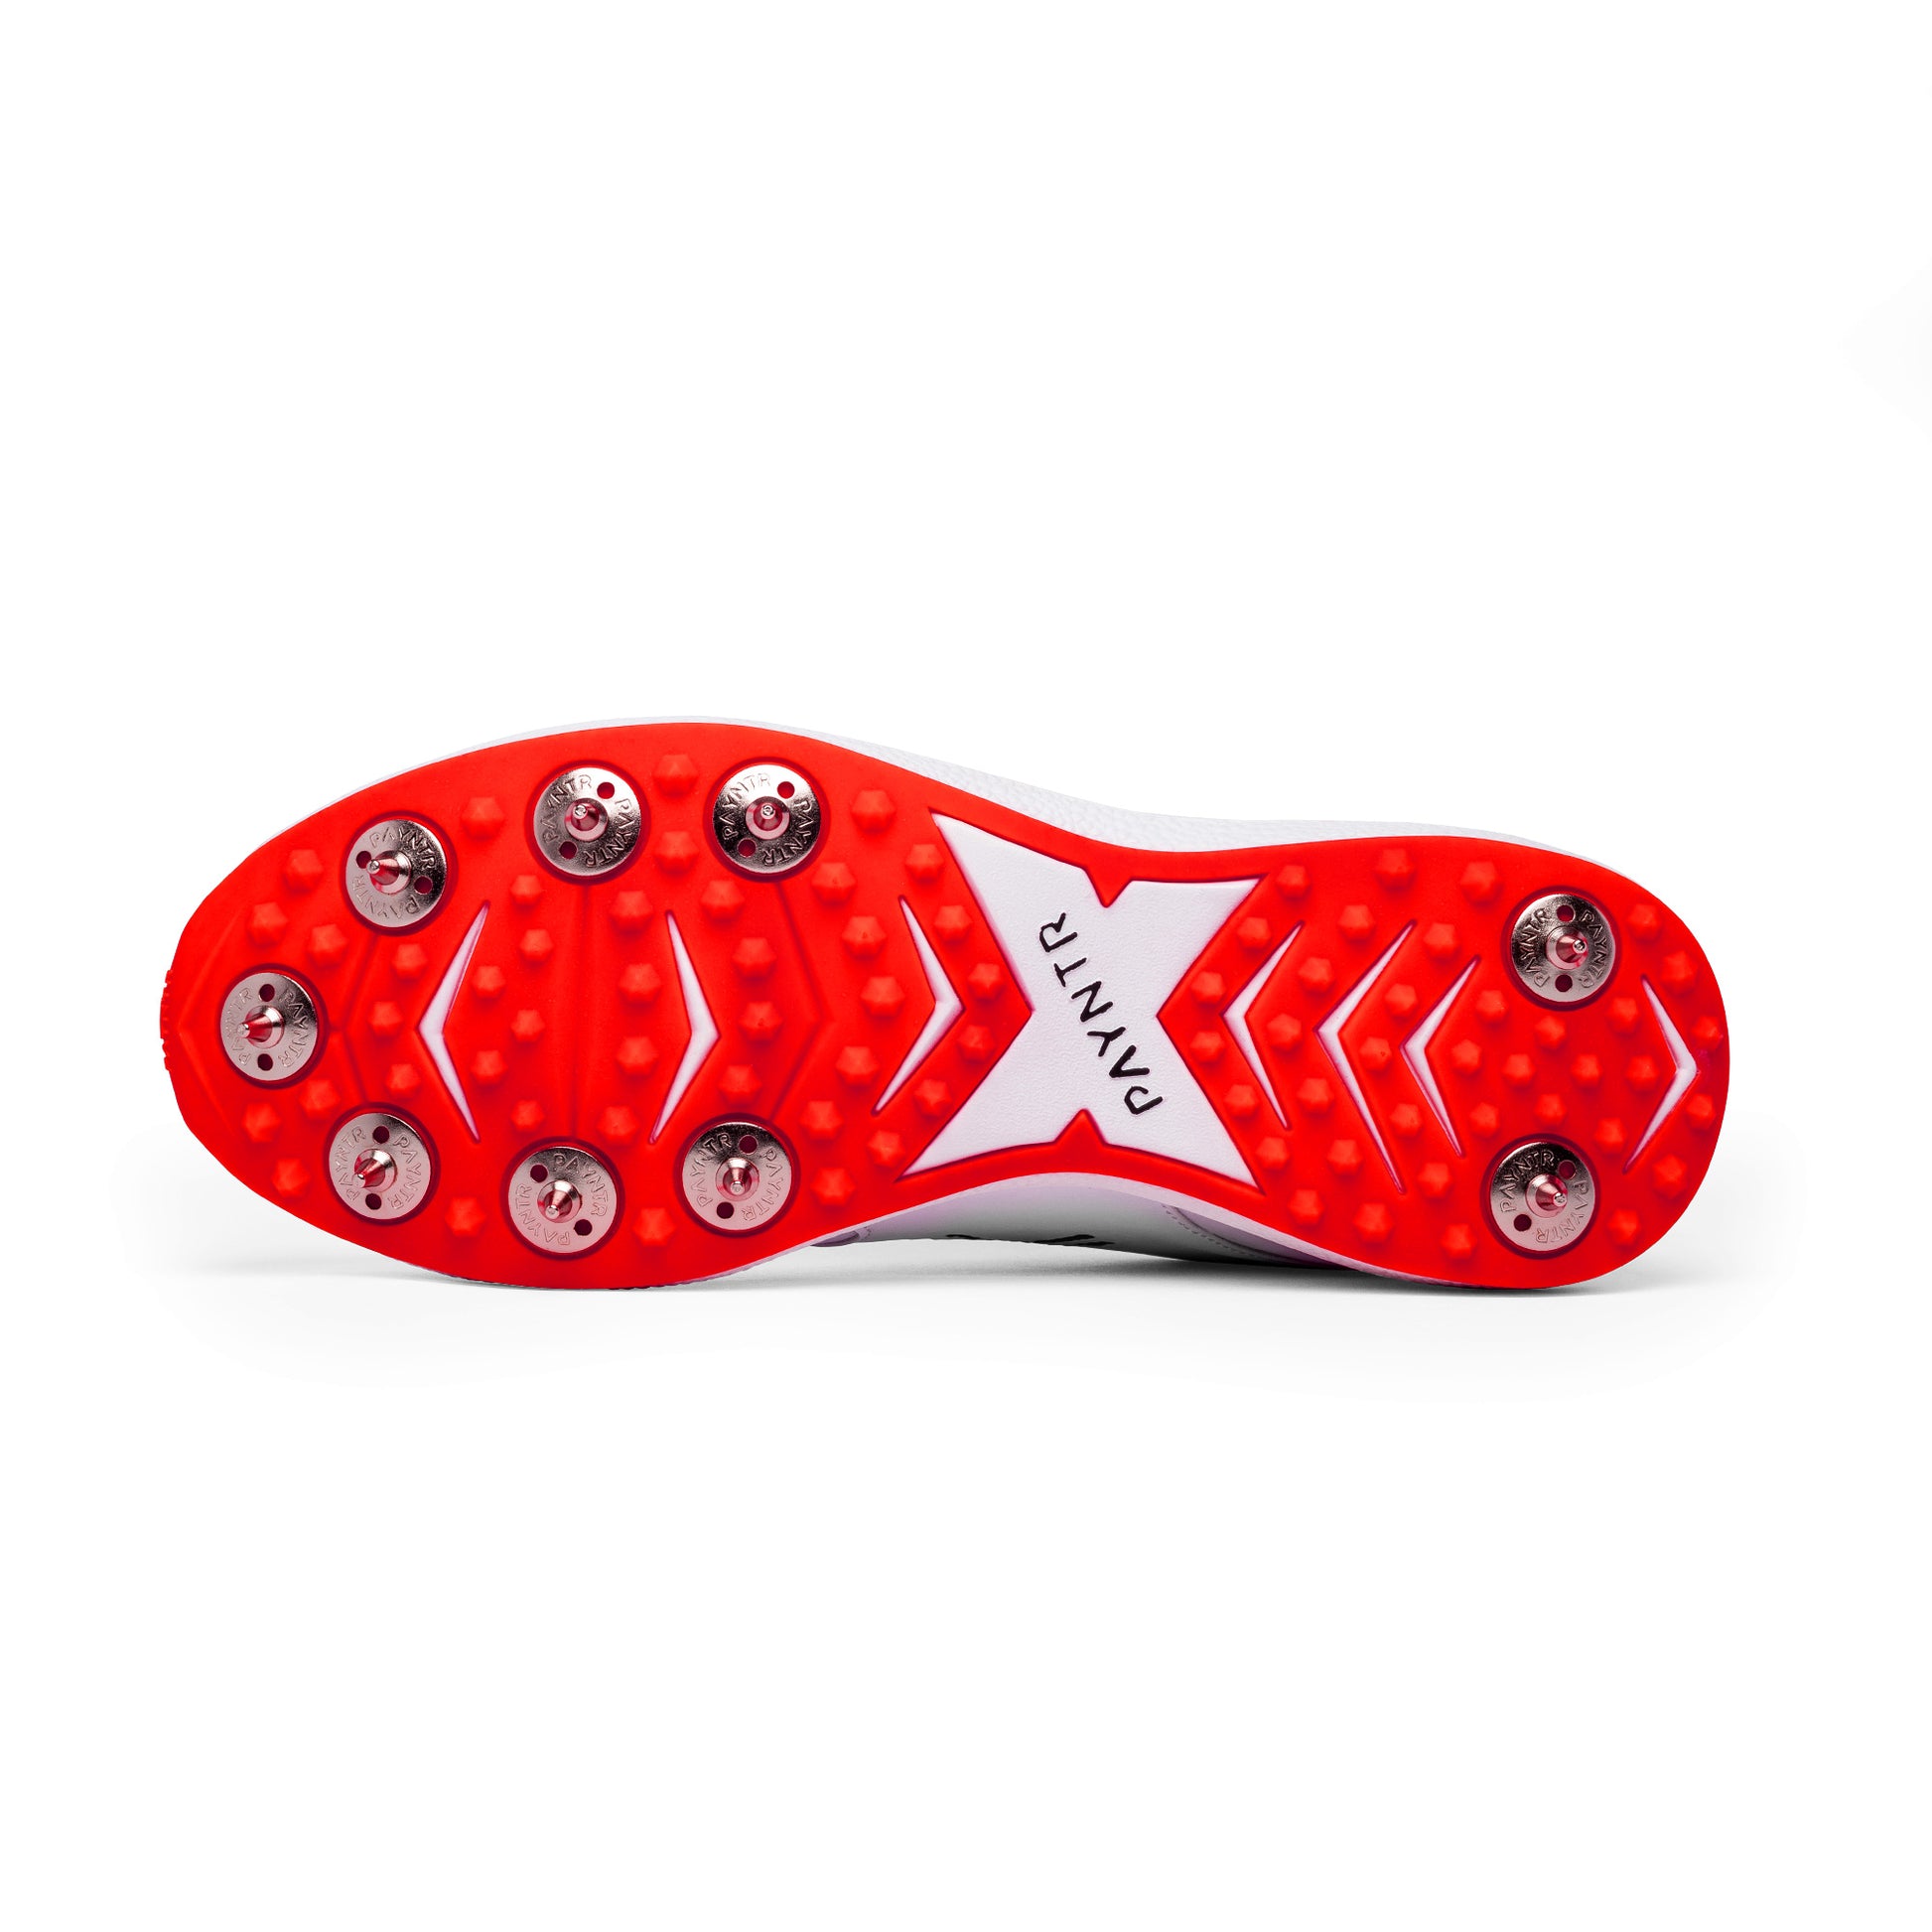 PAYNTR V Spike - White & Red - Outsole